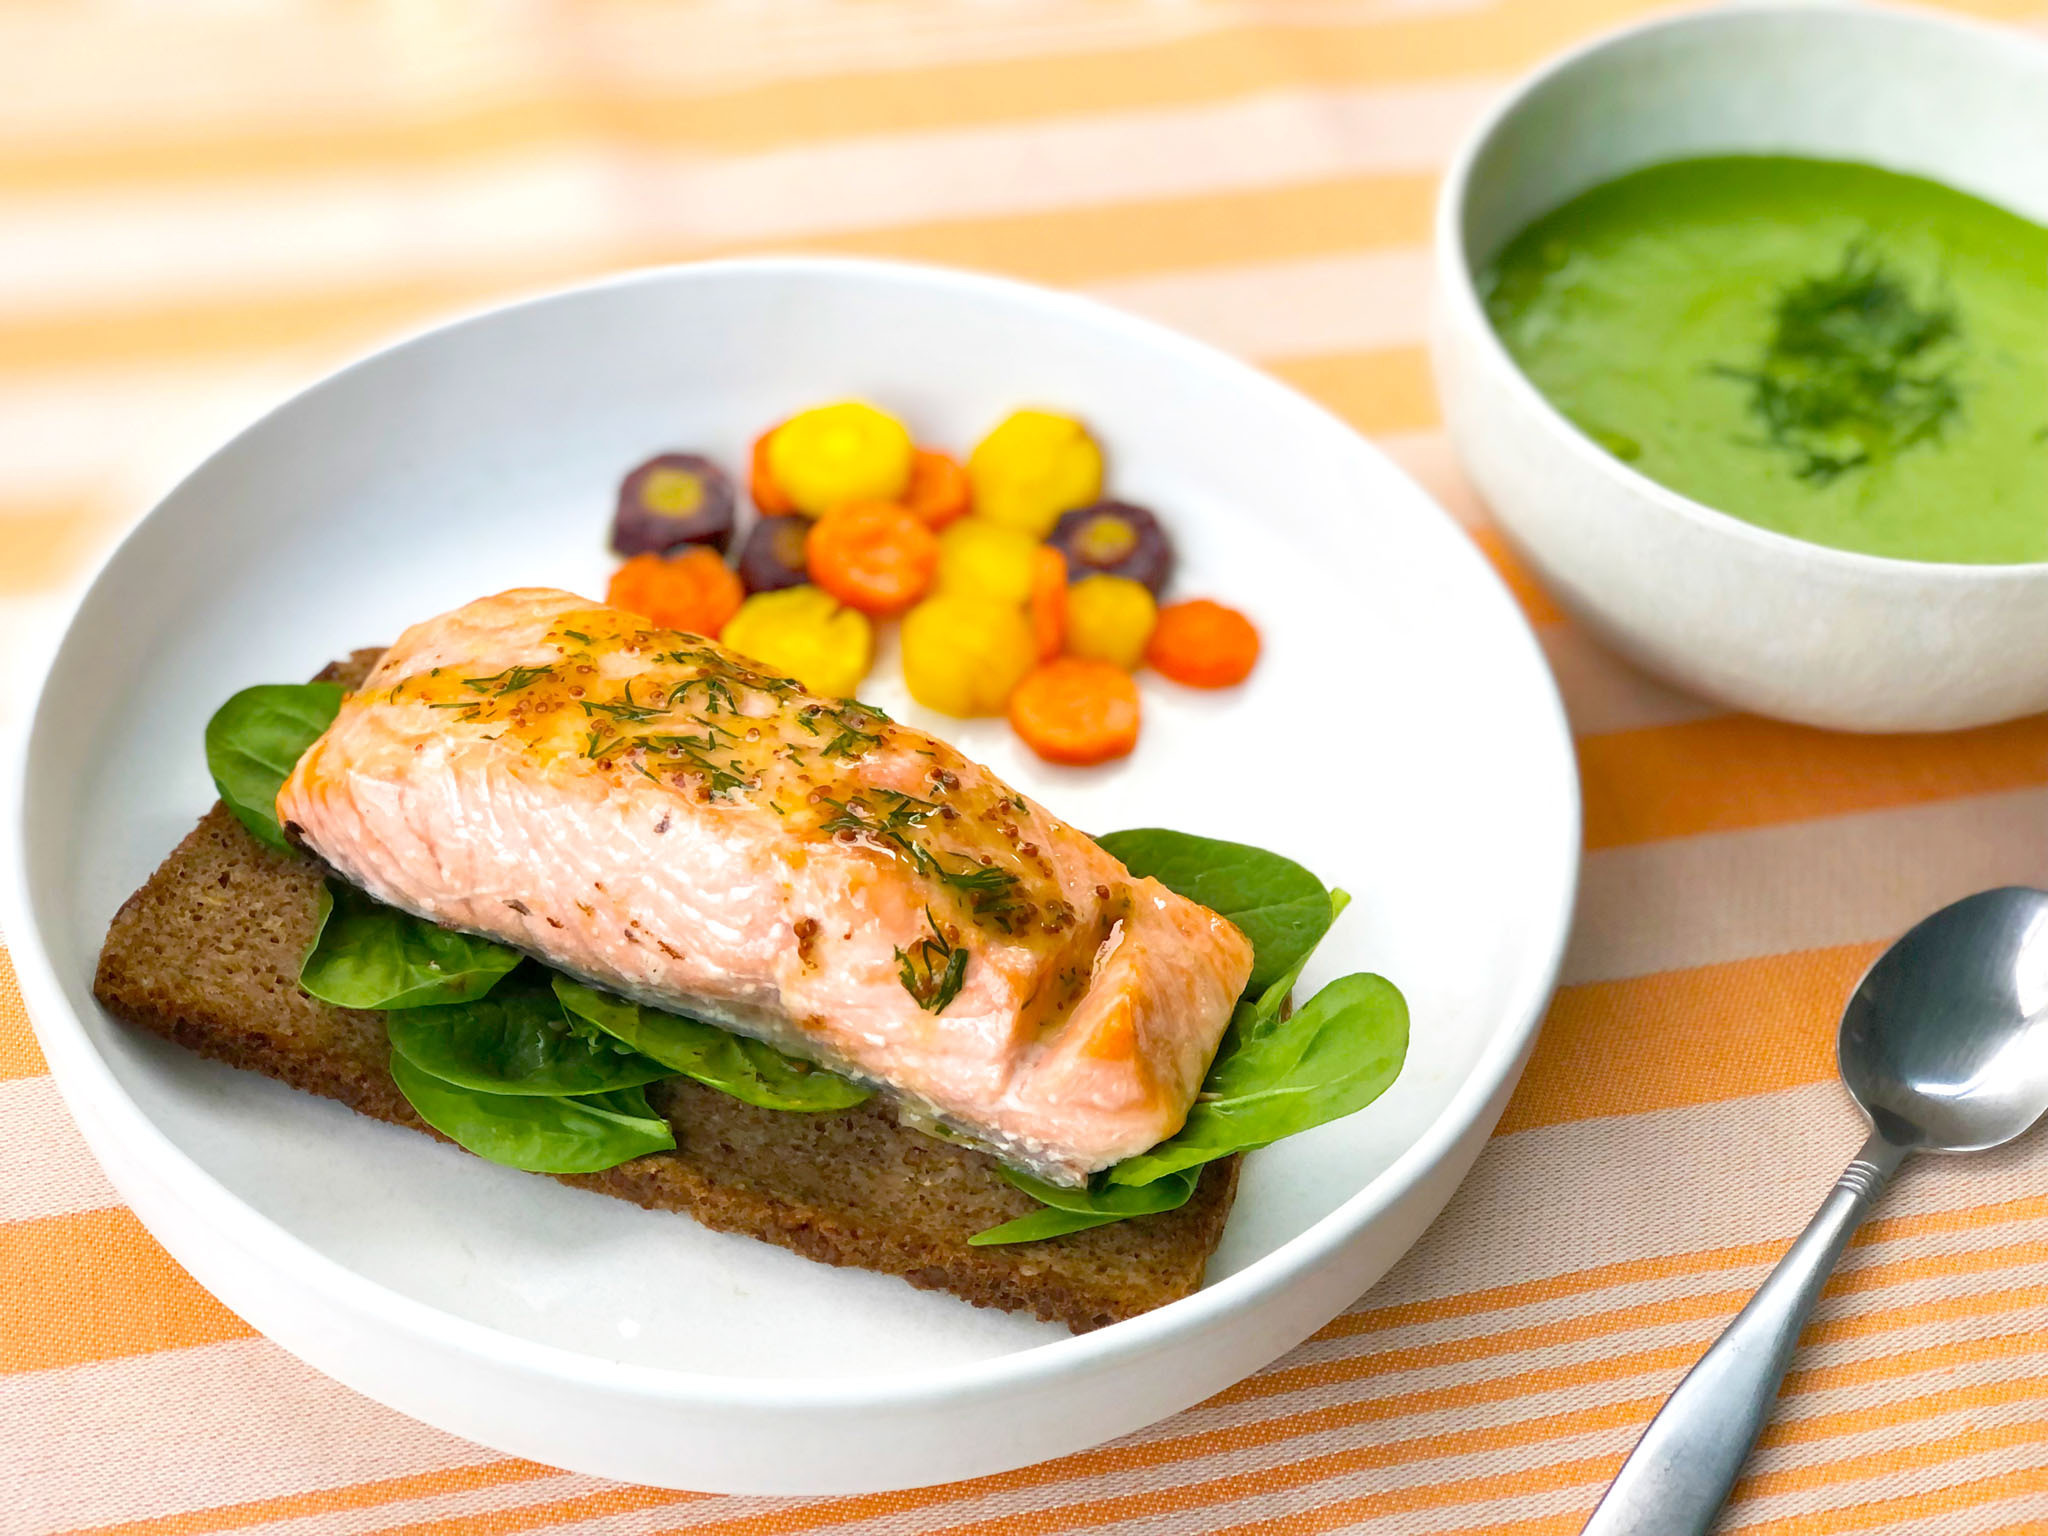 Nordic Roasted Salmon with Mustard-Dill Sauce and Roasted Carrots, served with Pea Soup Image